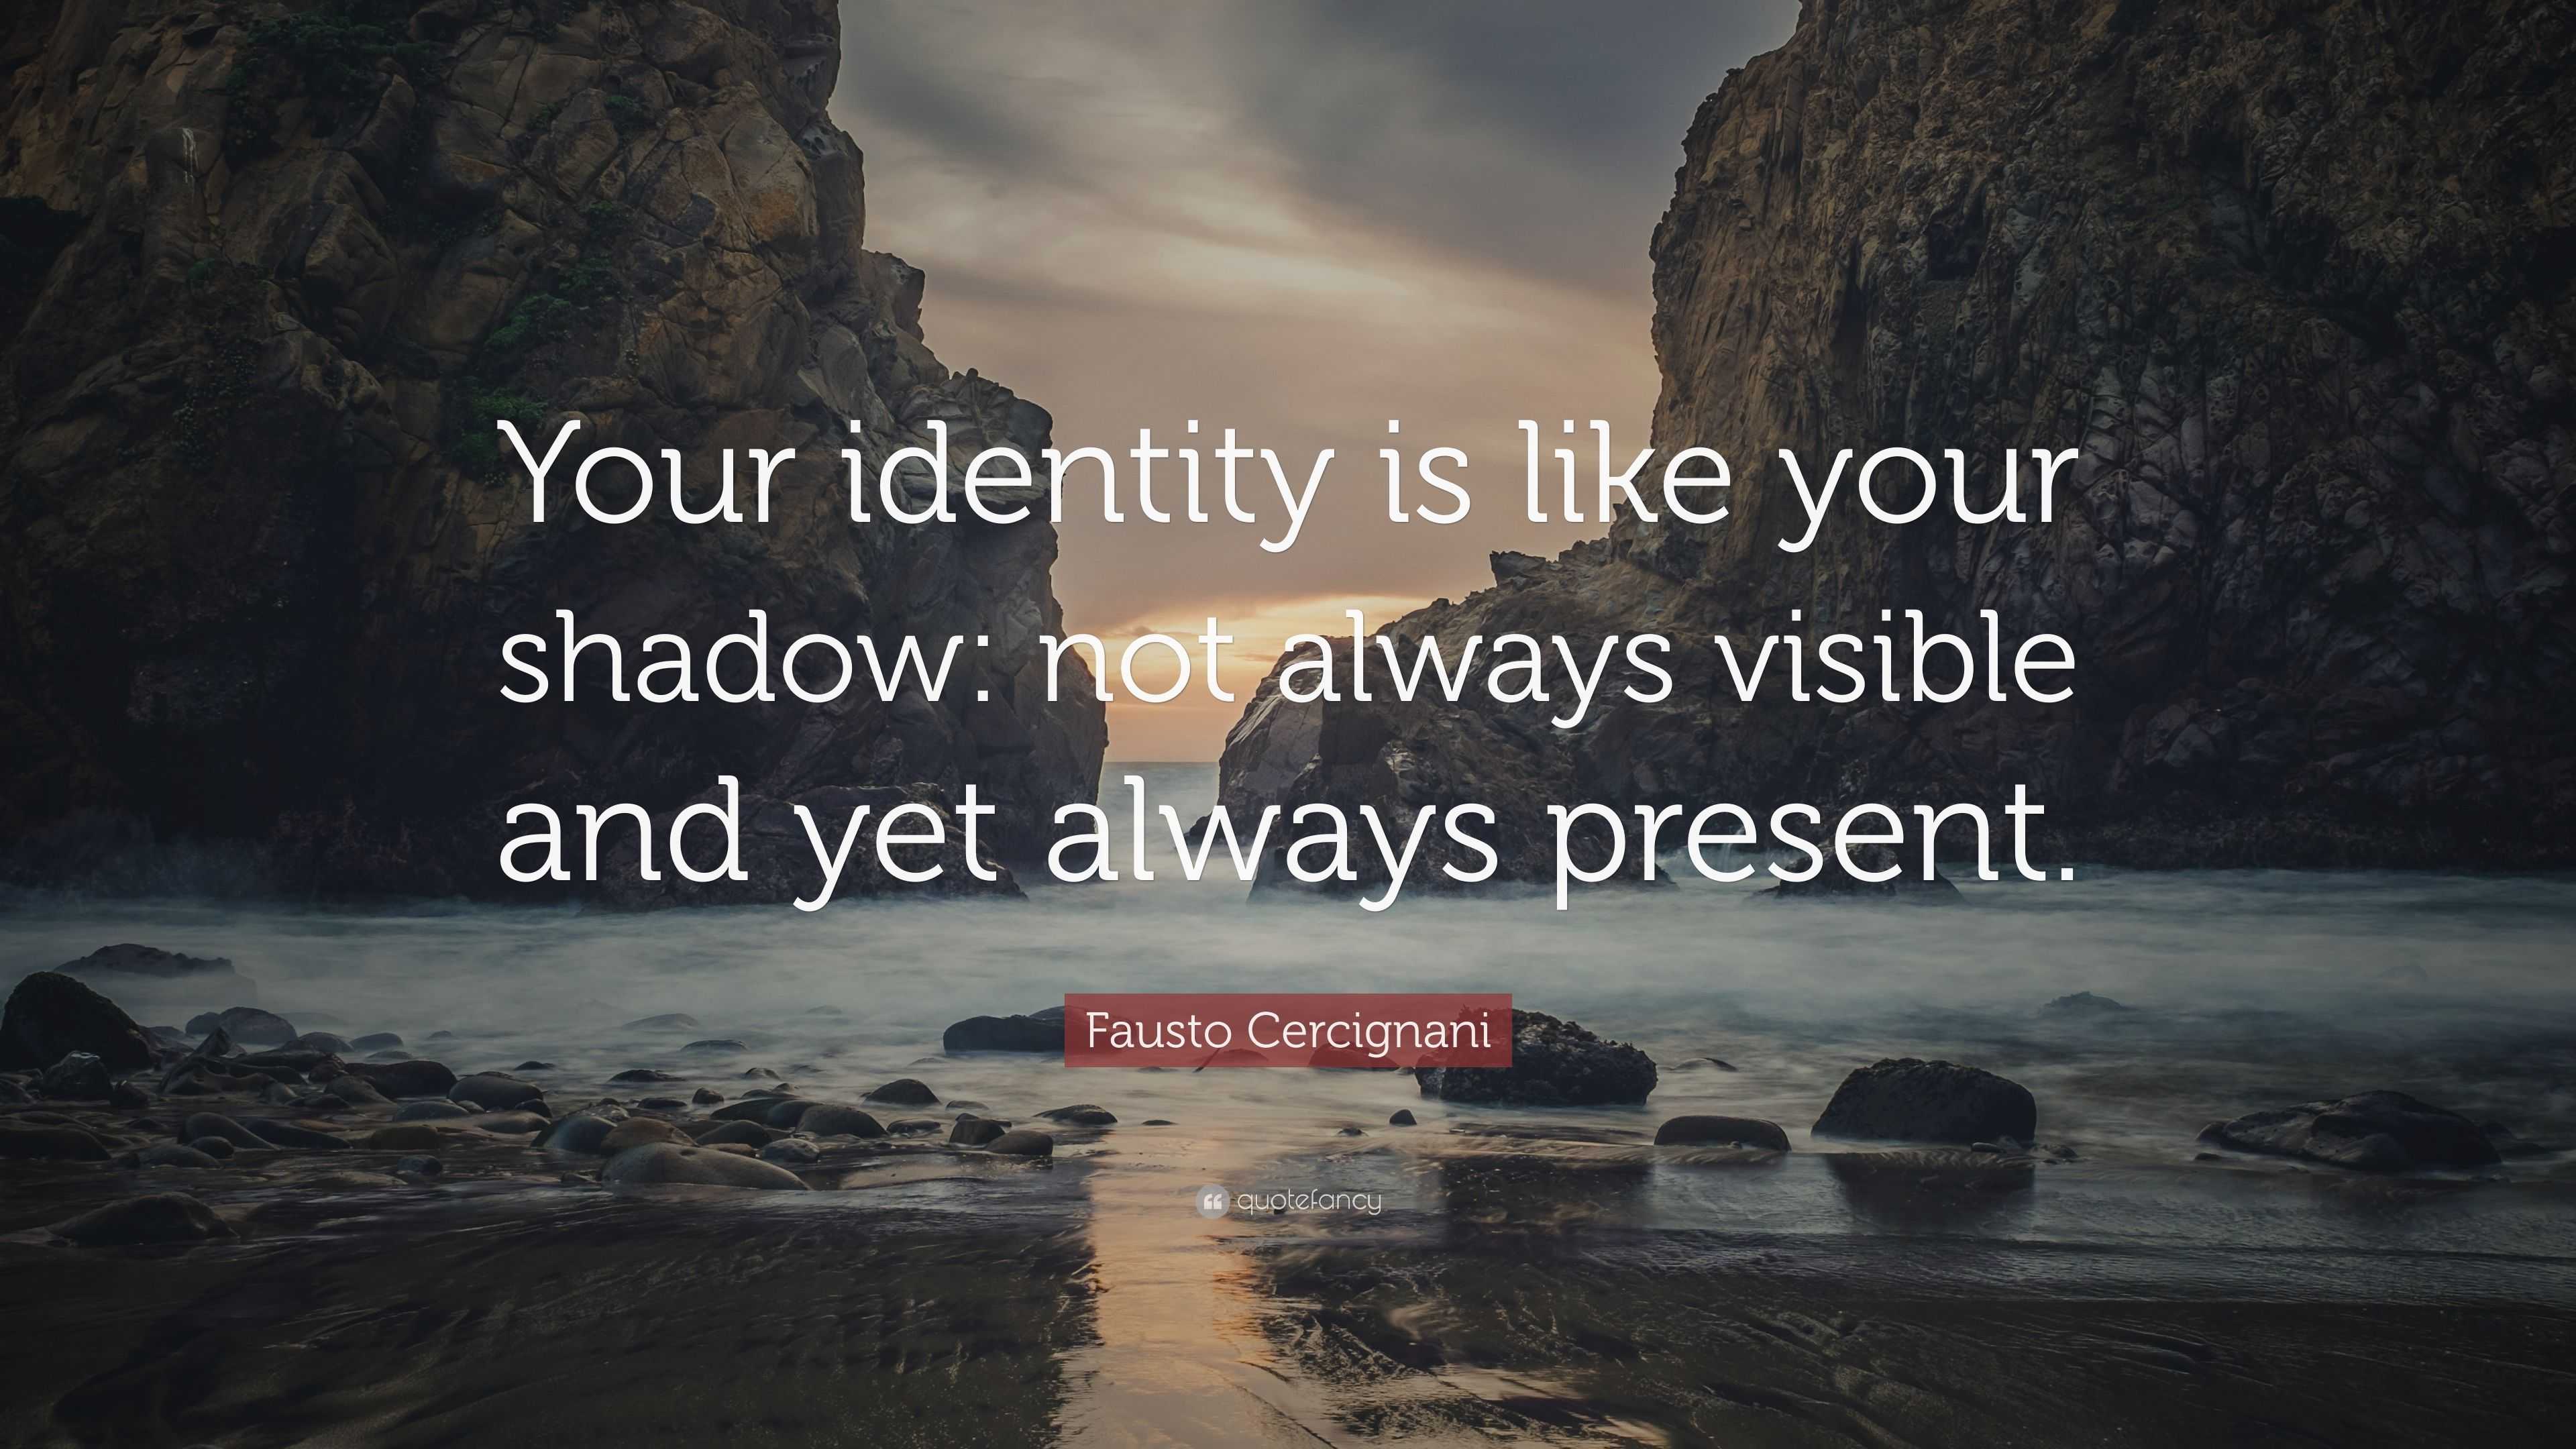 Fausto Cercignani Quote: “Your identity is like your shadow: not always